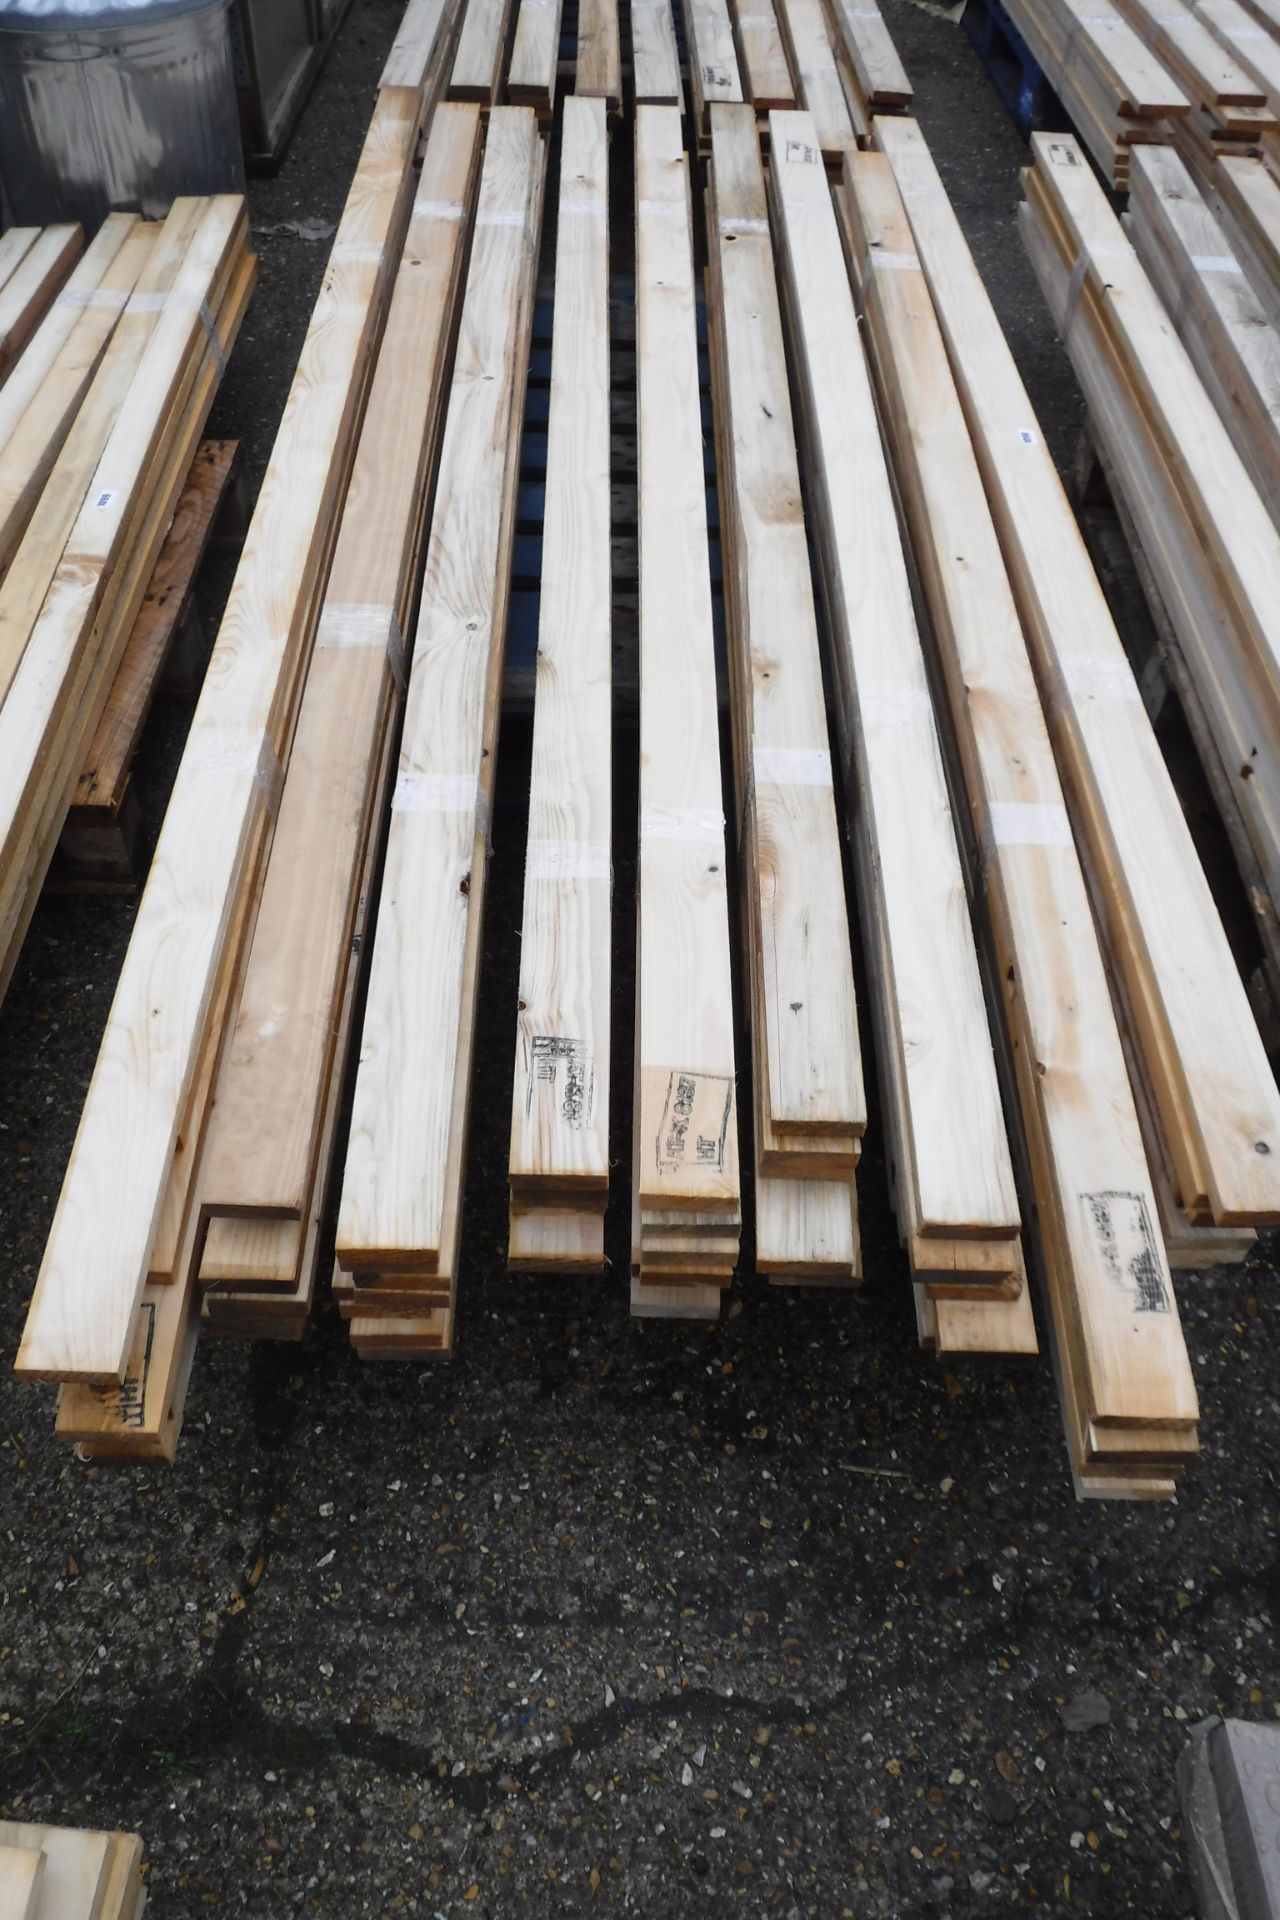 Pallet of 9 bundles of approx. 8 3x1 planks of wood